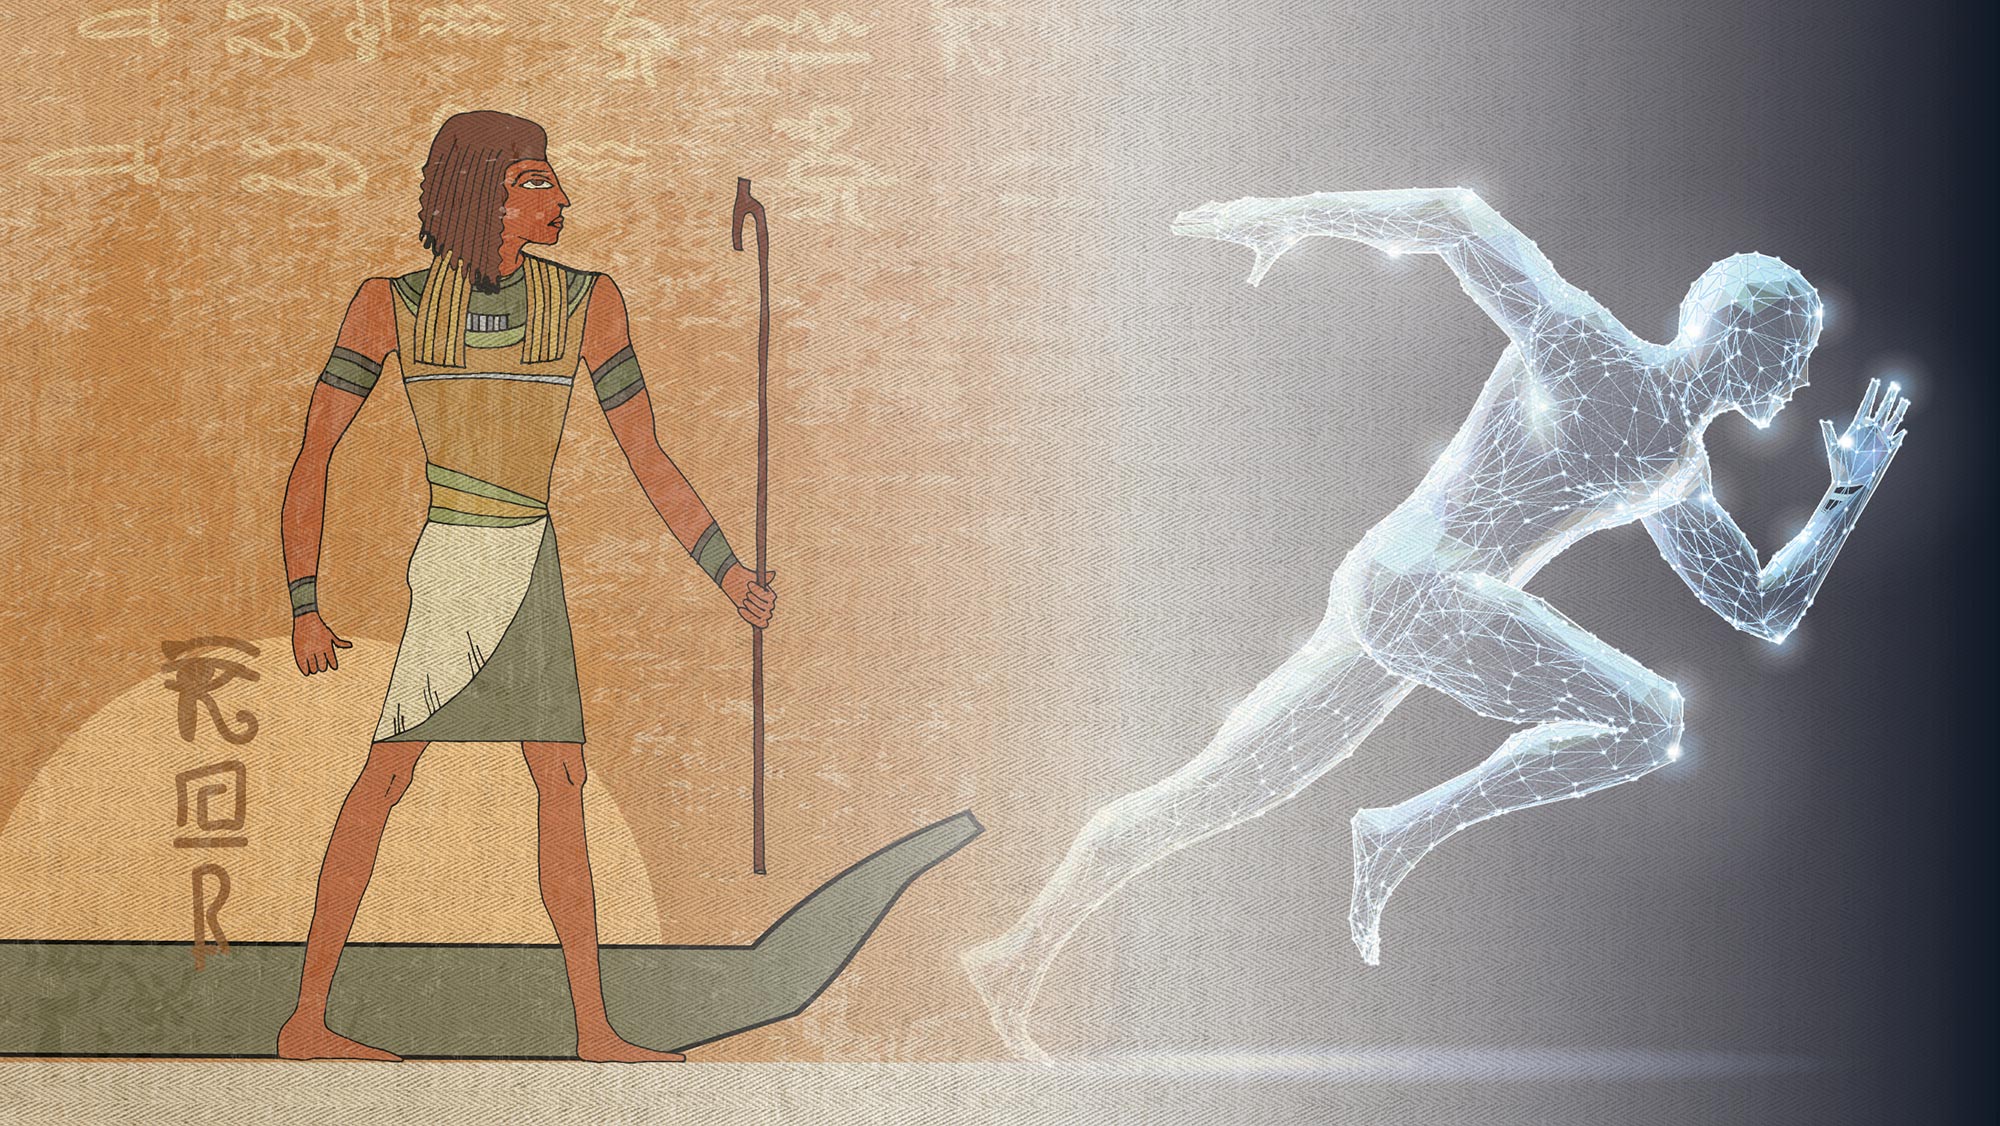 Illustration split between an ancient Egyptian figure holding a staff on the left and a digital, glowing outline of a human form running on the right, suggesting a concept of history meeting modern technology. 